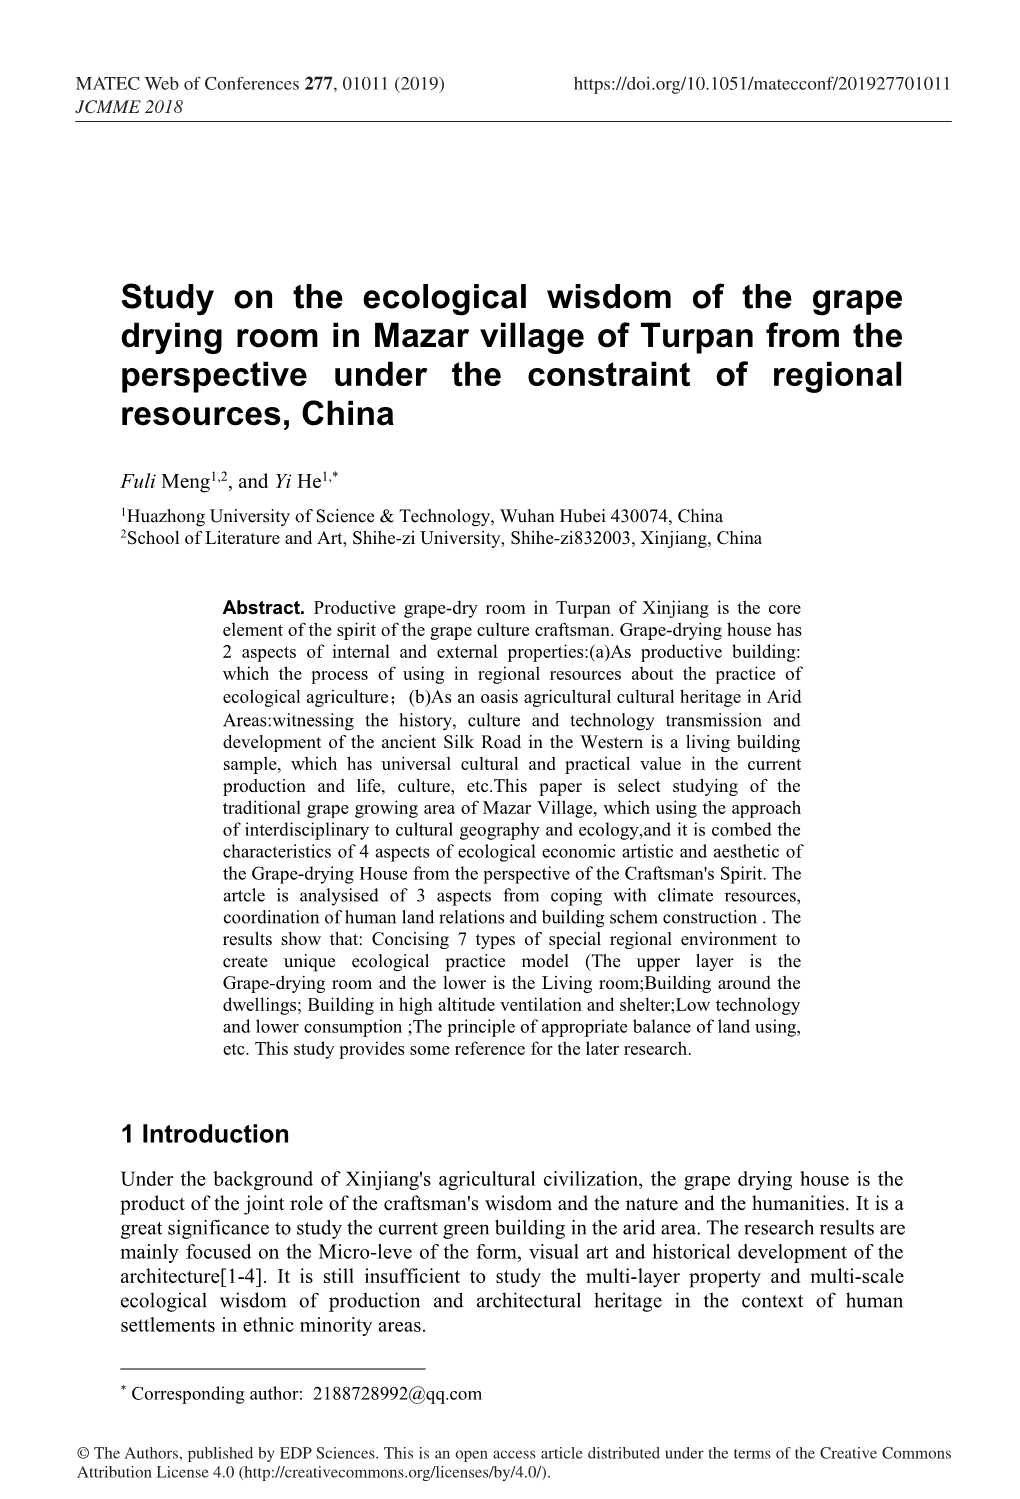 Study on the Ecological Wisdom of the Grape Drying Room in Mazar Village of Turpan from the Perspective Under the Constraint of Regional Resources, China